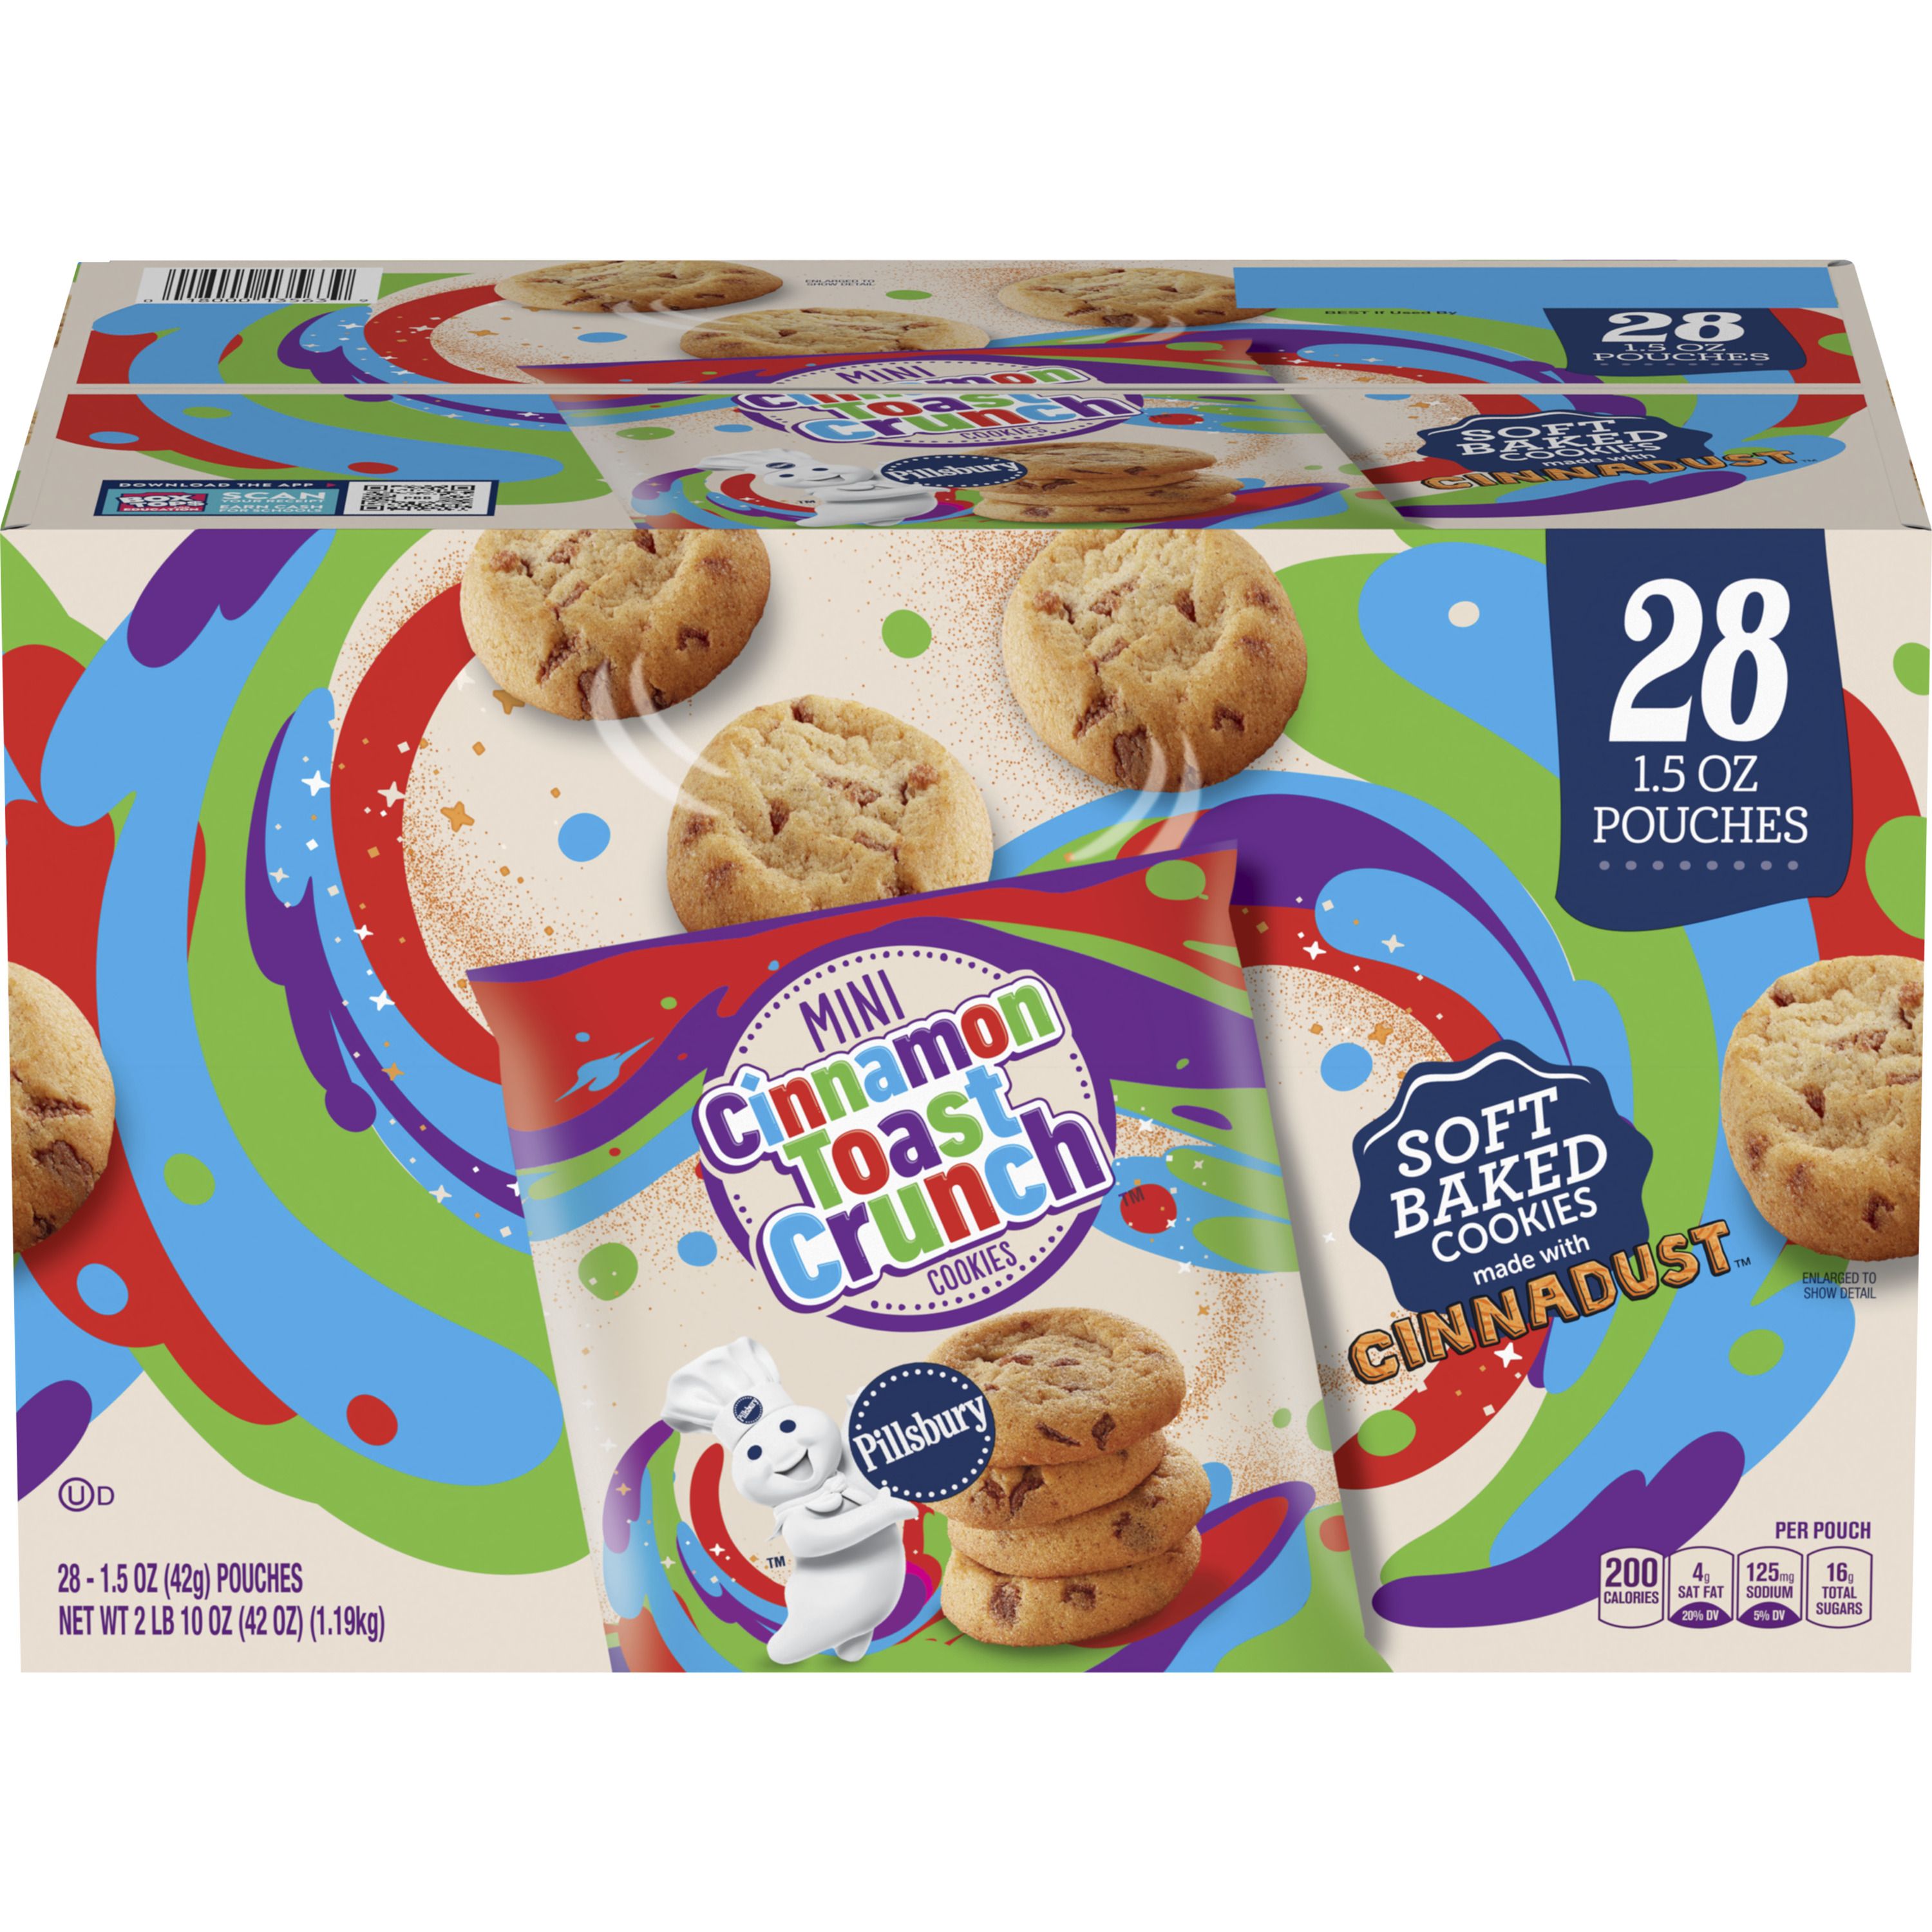 Pillsbury Cinnamon Toast Crunch Mini Soft-Baked Cookies, Made with CINNADUST, 28 Pouches, 42 oz - Front